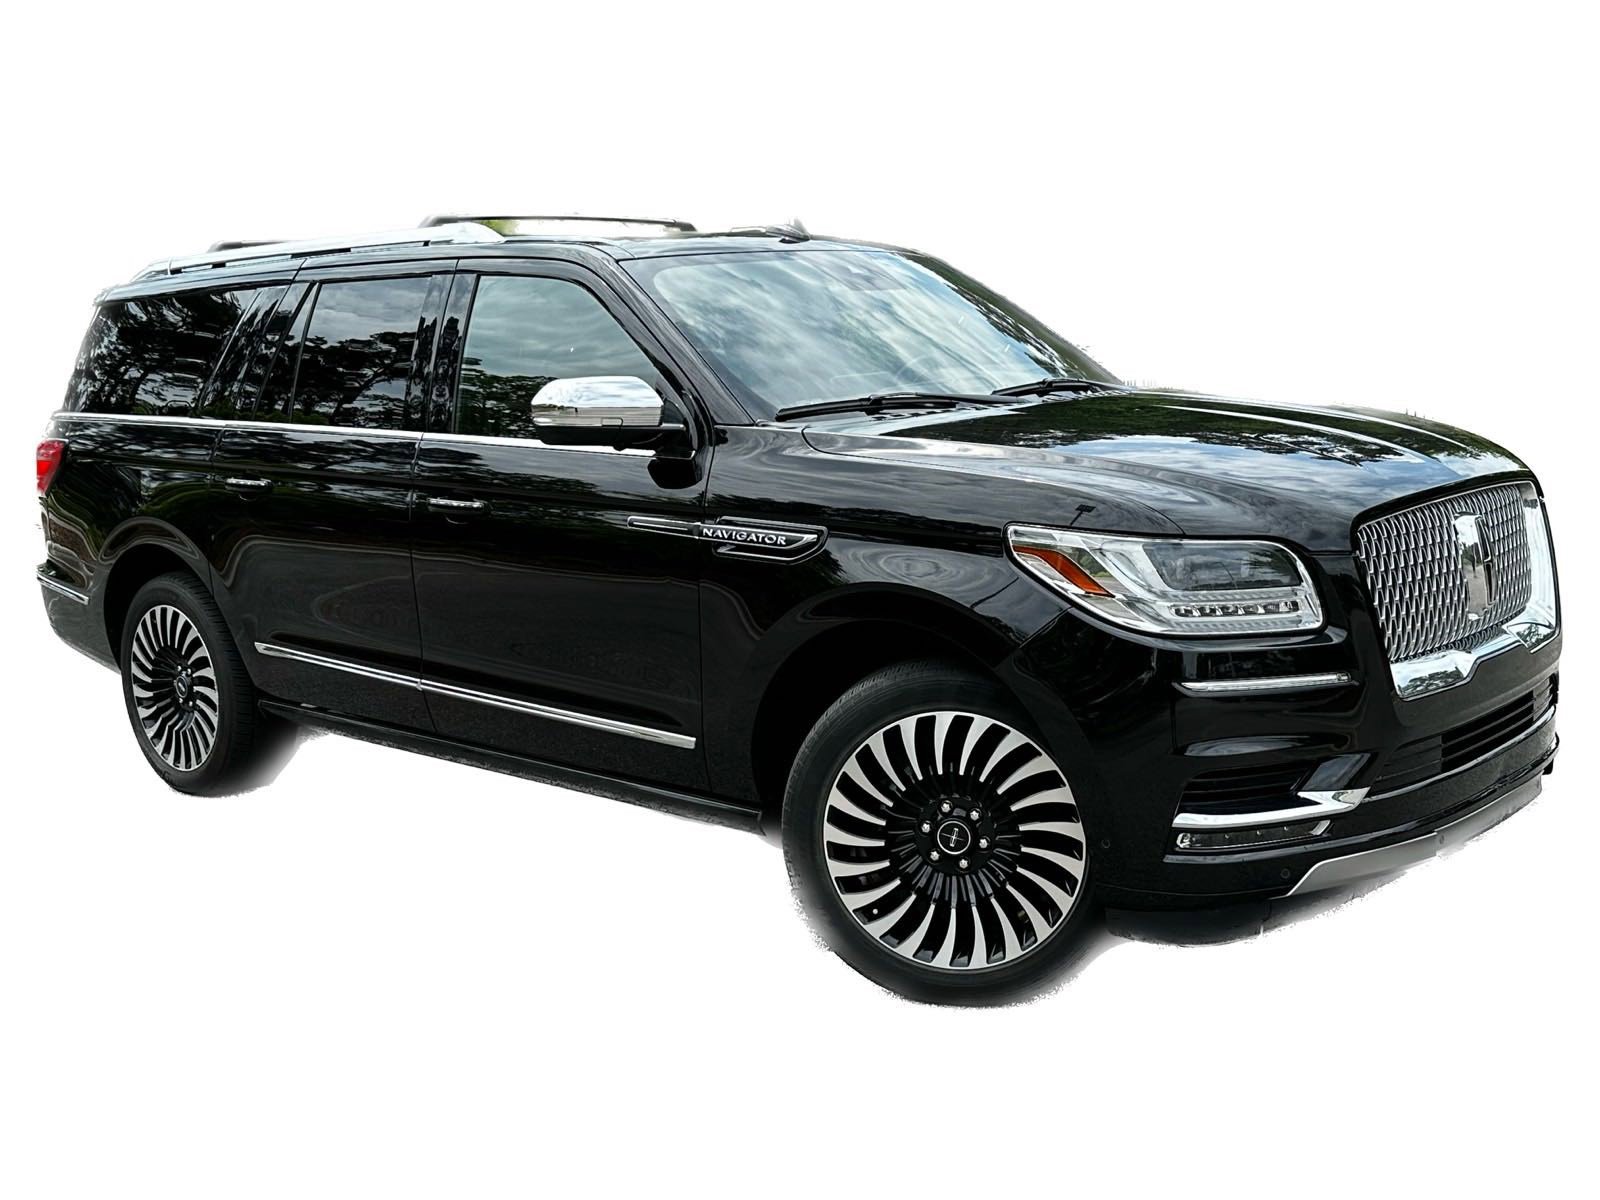 Pre-Owned 2020 Lincoln Navigator L Black Label SUV for Sale #XH02667A | BMW  of Murrieta